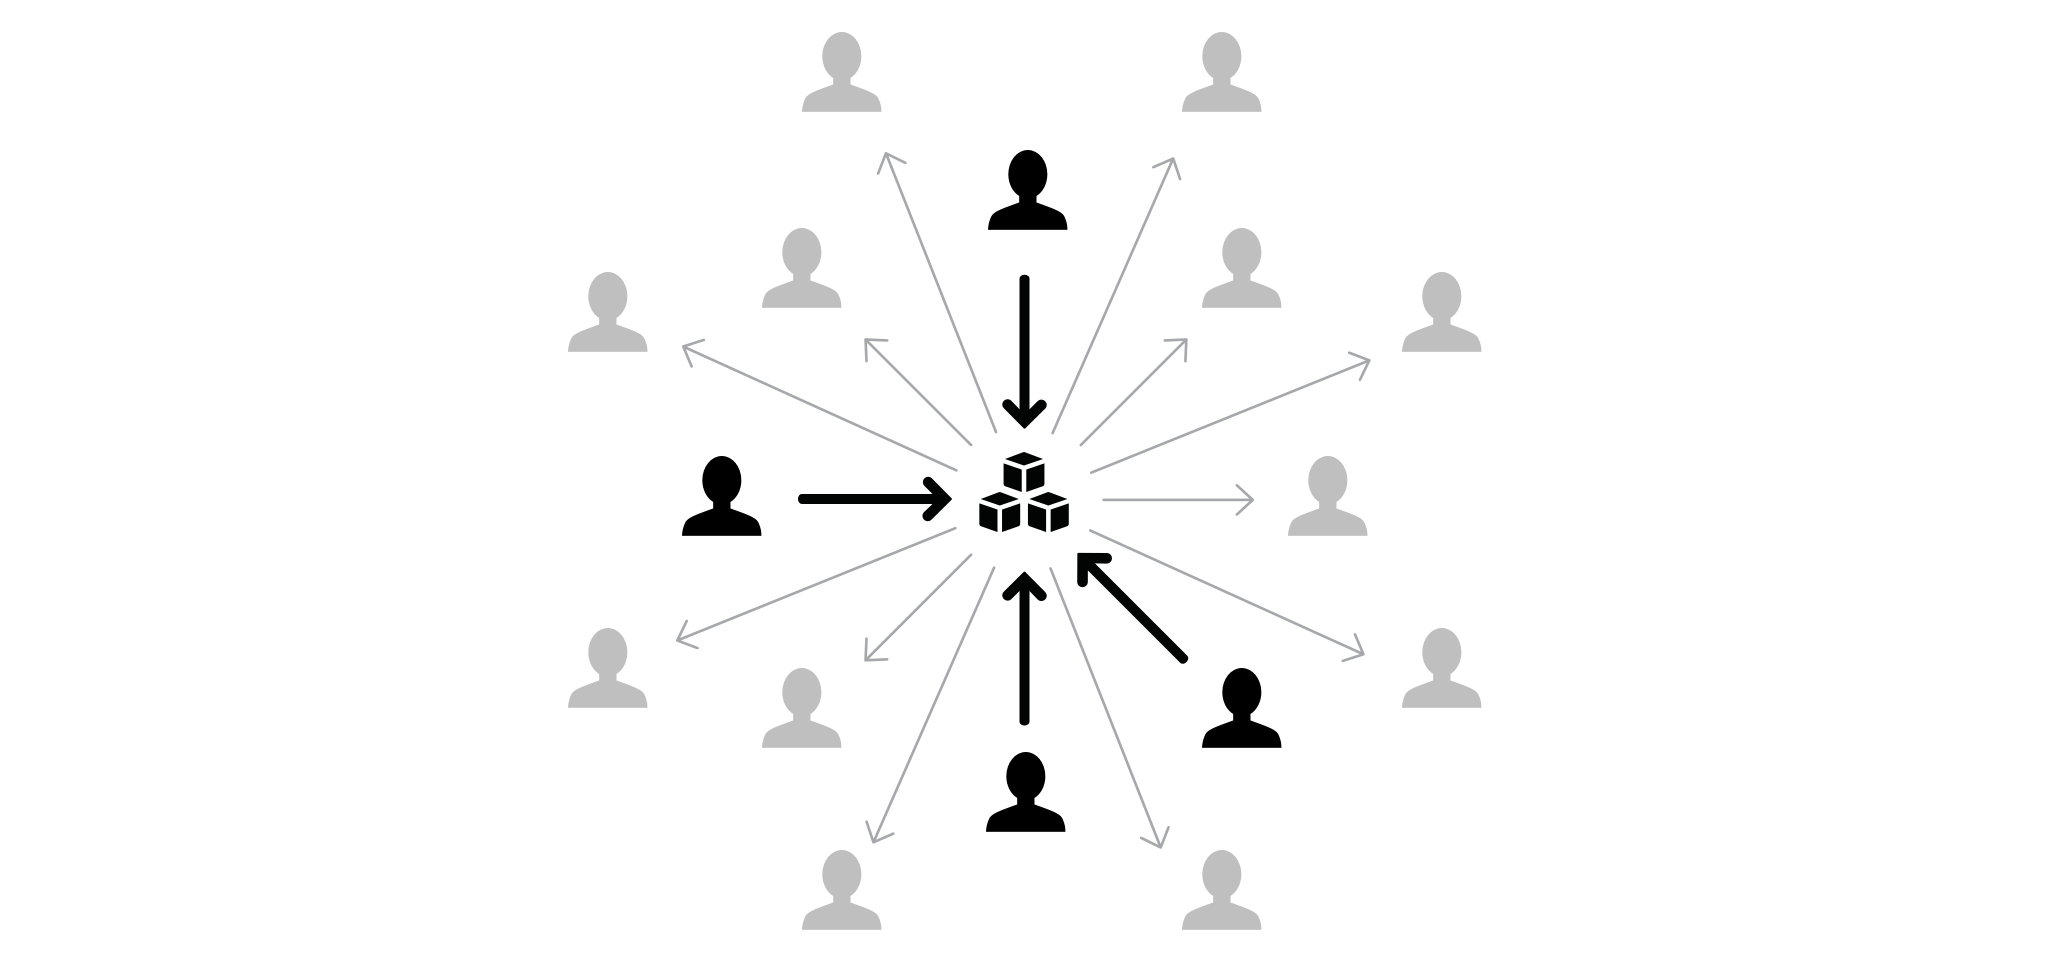 Diagram connoting contributions from federated contributors to a central system toolkit